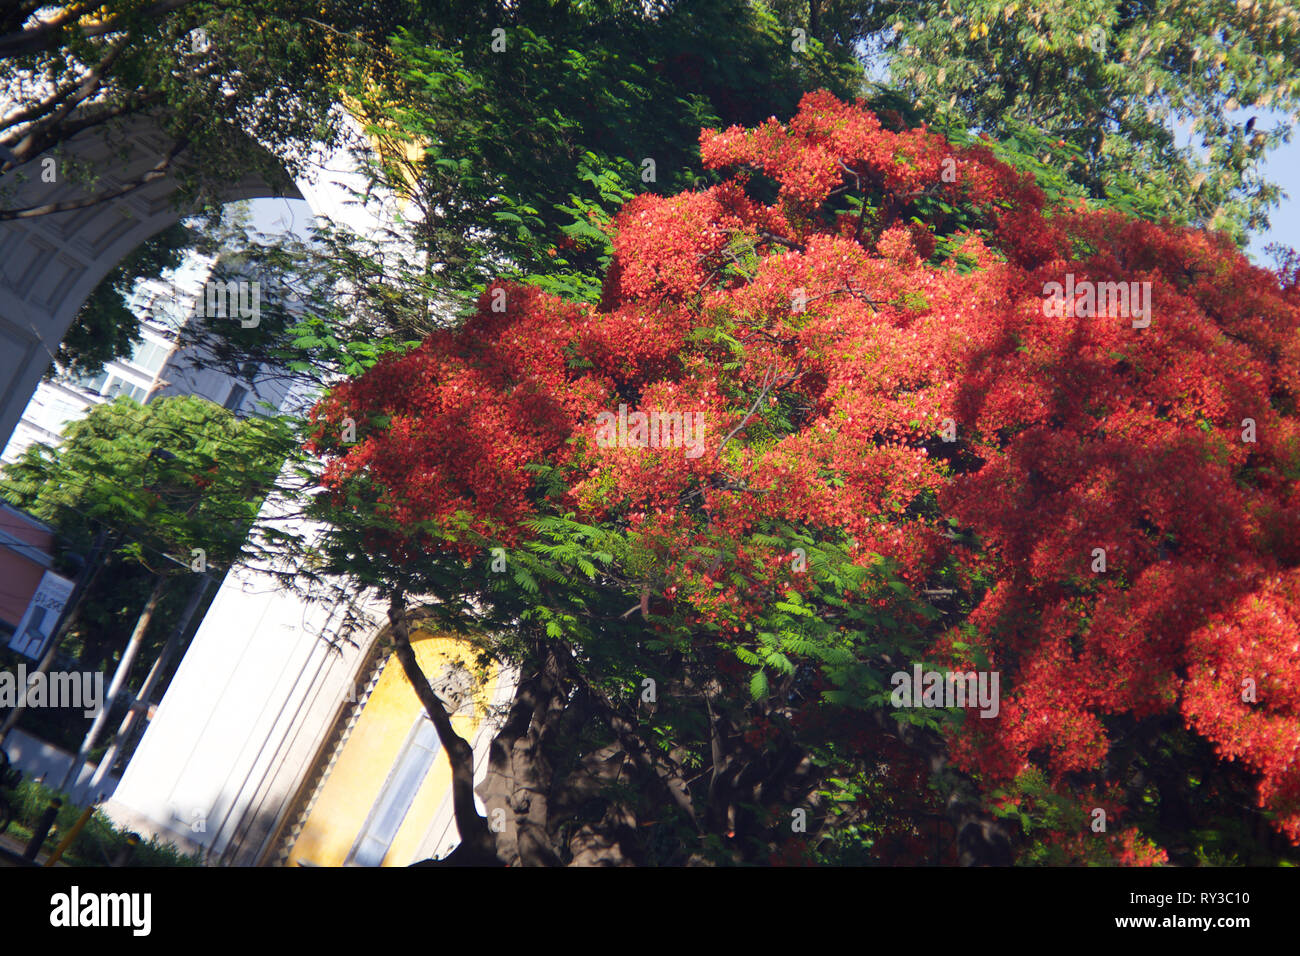 Red flowers tree at spring, Los Arcos monument, Guadalajara, Jalisco, Mexico Stock Photo